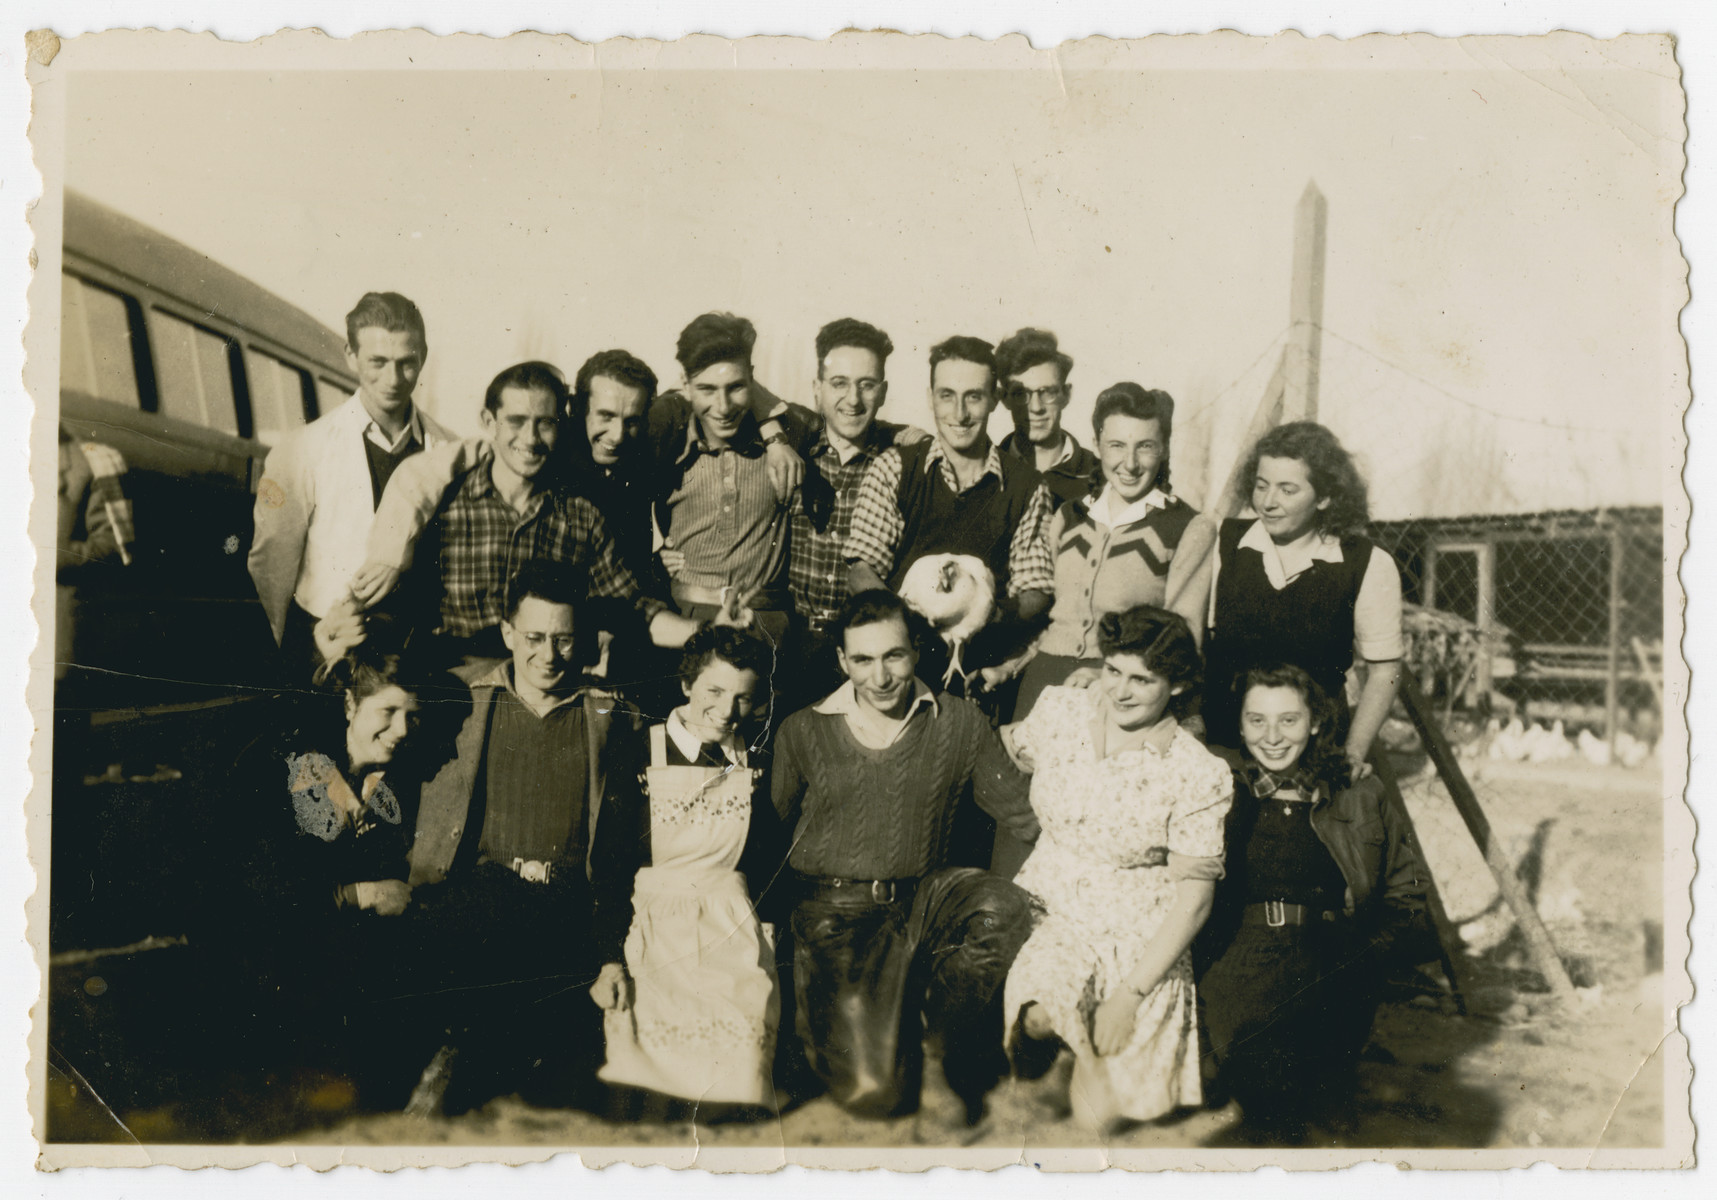 Photograph from an album entitled, "Hacshara Kidma Chile,"  documenting life on a postwar Shomer Hatzair Zionist agricultural collective in Chile.

A group of young adults stops for a photo while traveling by bus to the haschara. The inscription on the back (in German) reads, "Trip to the Hachshara."  The inscription on the album page (in Spanish) reads, "The first Jalutzim [pioneers]...."

Among those pictured are Susi Hirschberg, Hanni Bloch, Finola (?) Muller, Ballo, Carlos Mayer, Manfred Flat, Sallo Asner (?), Hanus Ehrlich (?), Ernst Joel, Ruth Klein, Marion Jokolsh (?), Hans Hoffstatt (?), Ramona Lorn (?), Meck Krotosch, Eva Frankel.